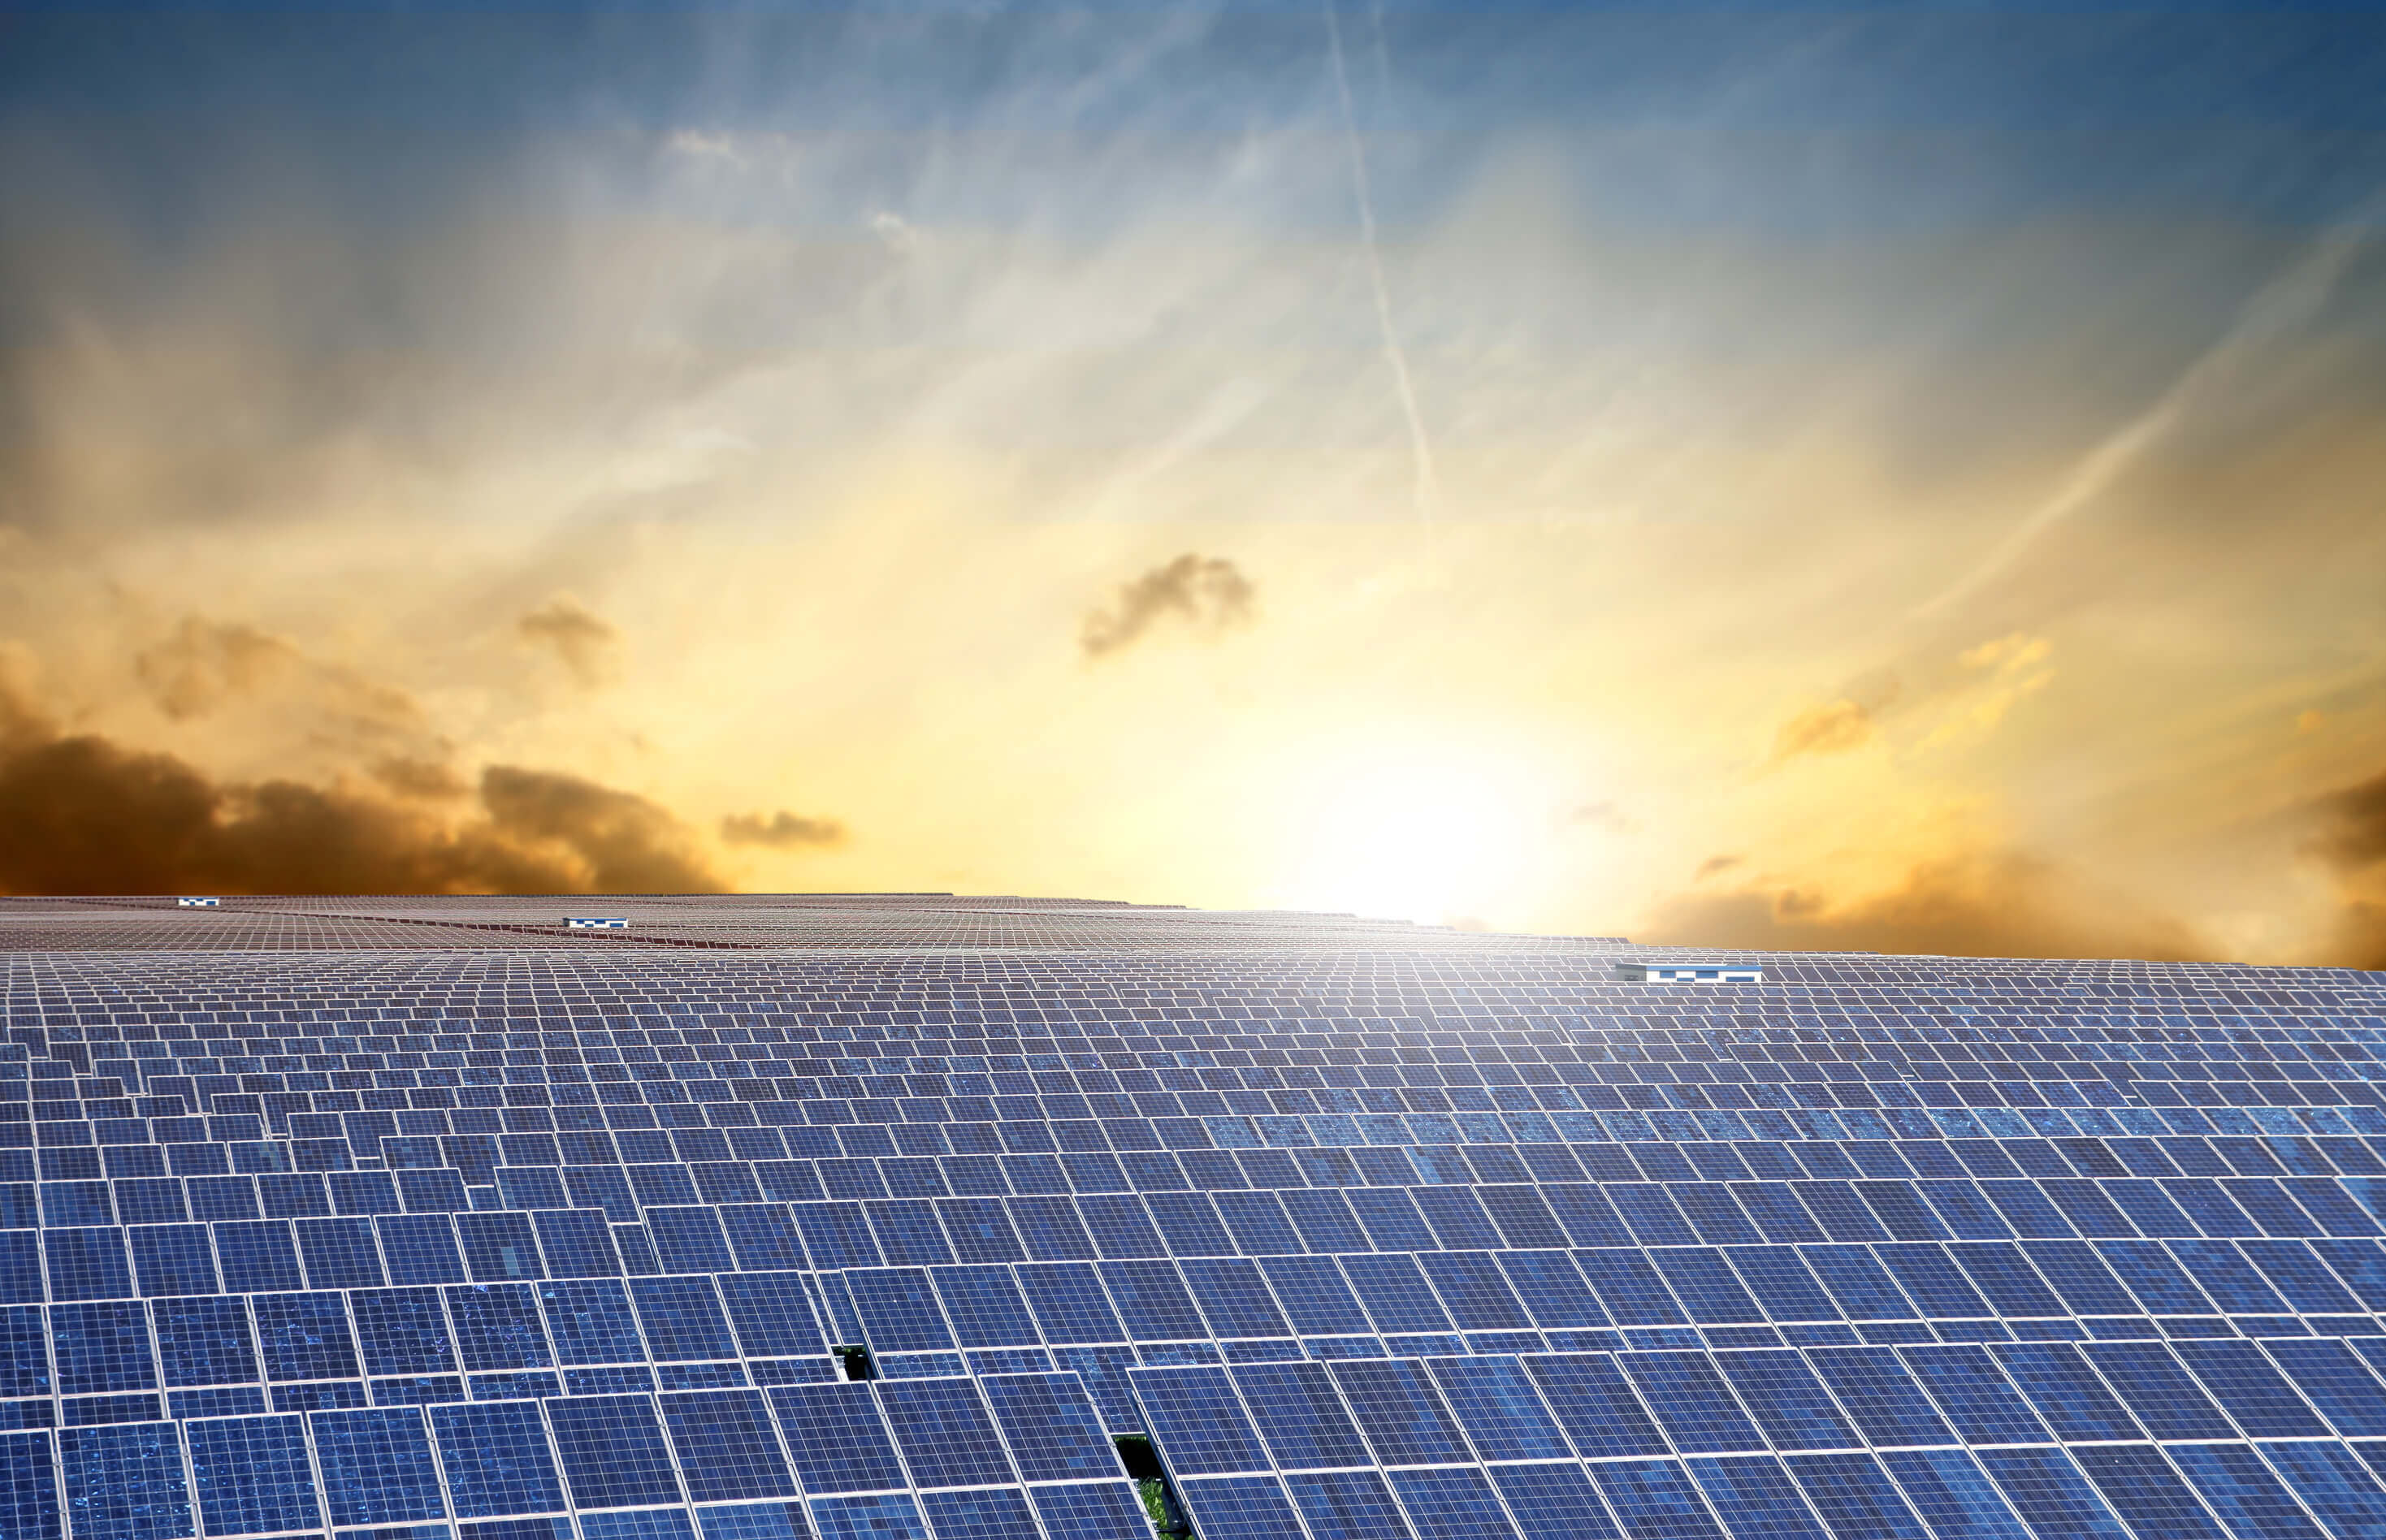 Tips for businesses that use commercial solar panel systems